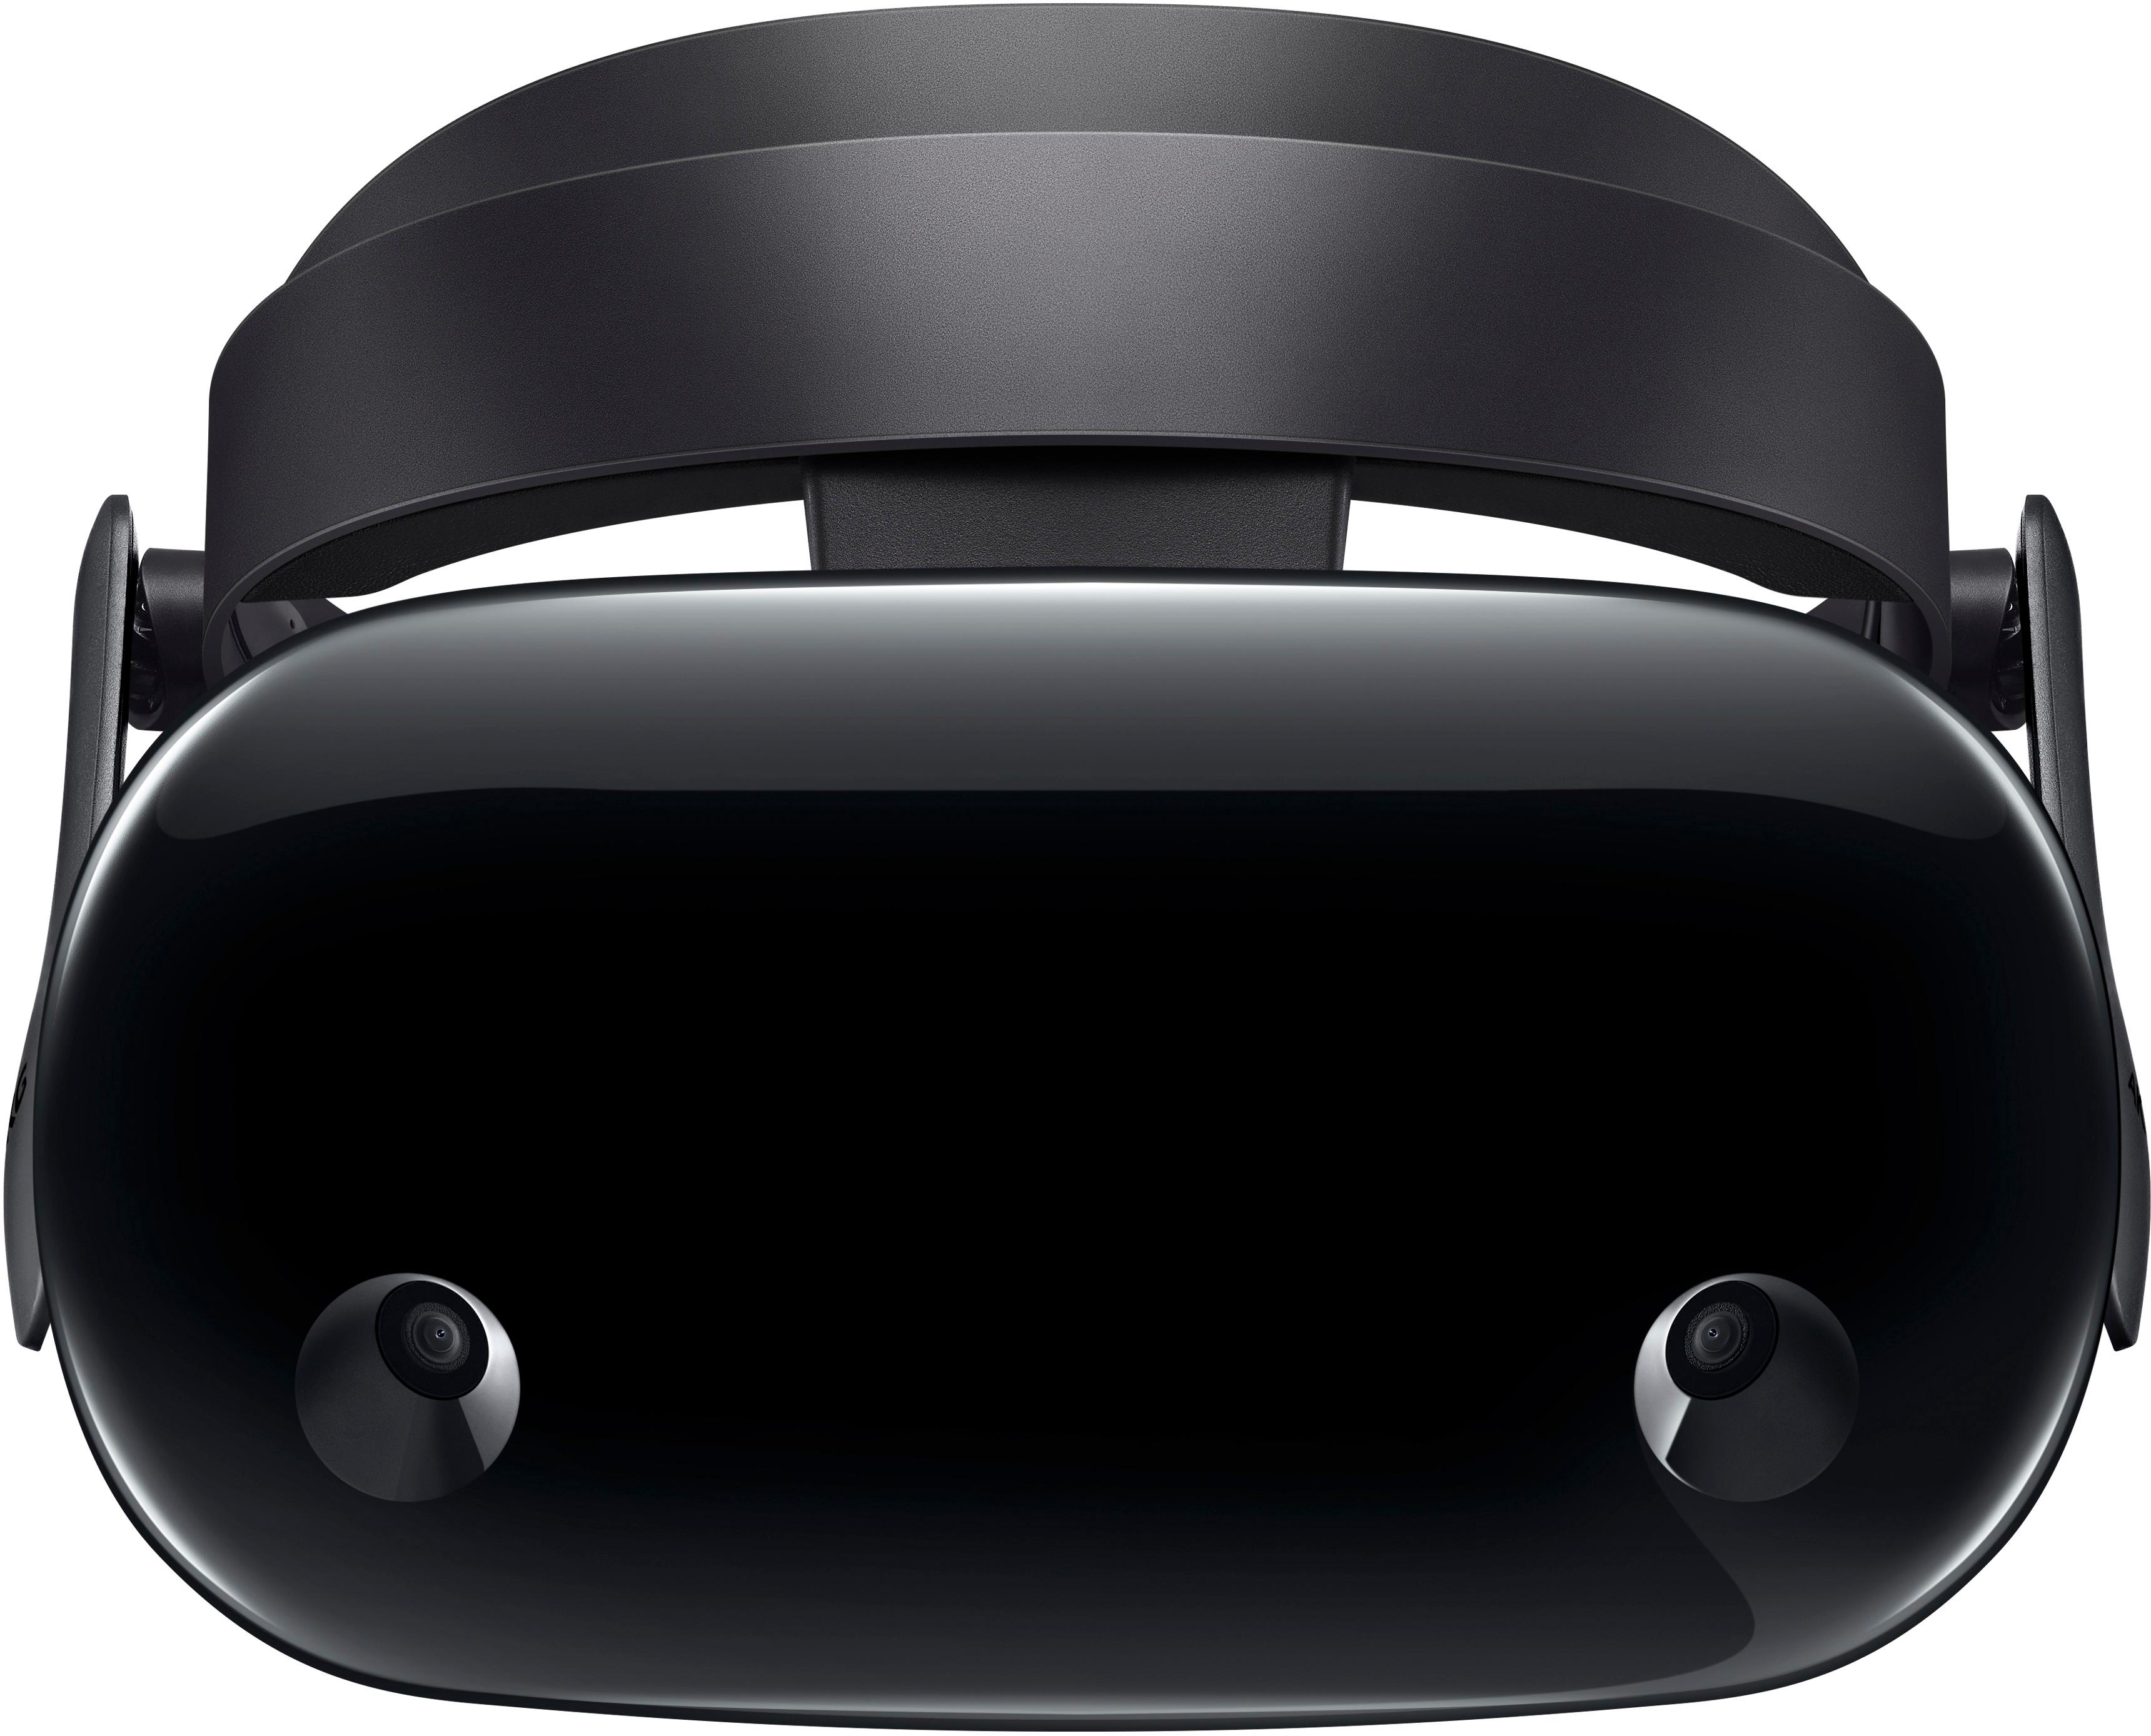 Customer Reviews: Samsung HMD Odyssey Mixed Reality Headset with ...